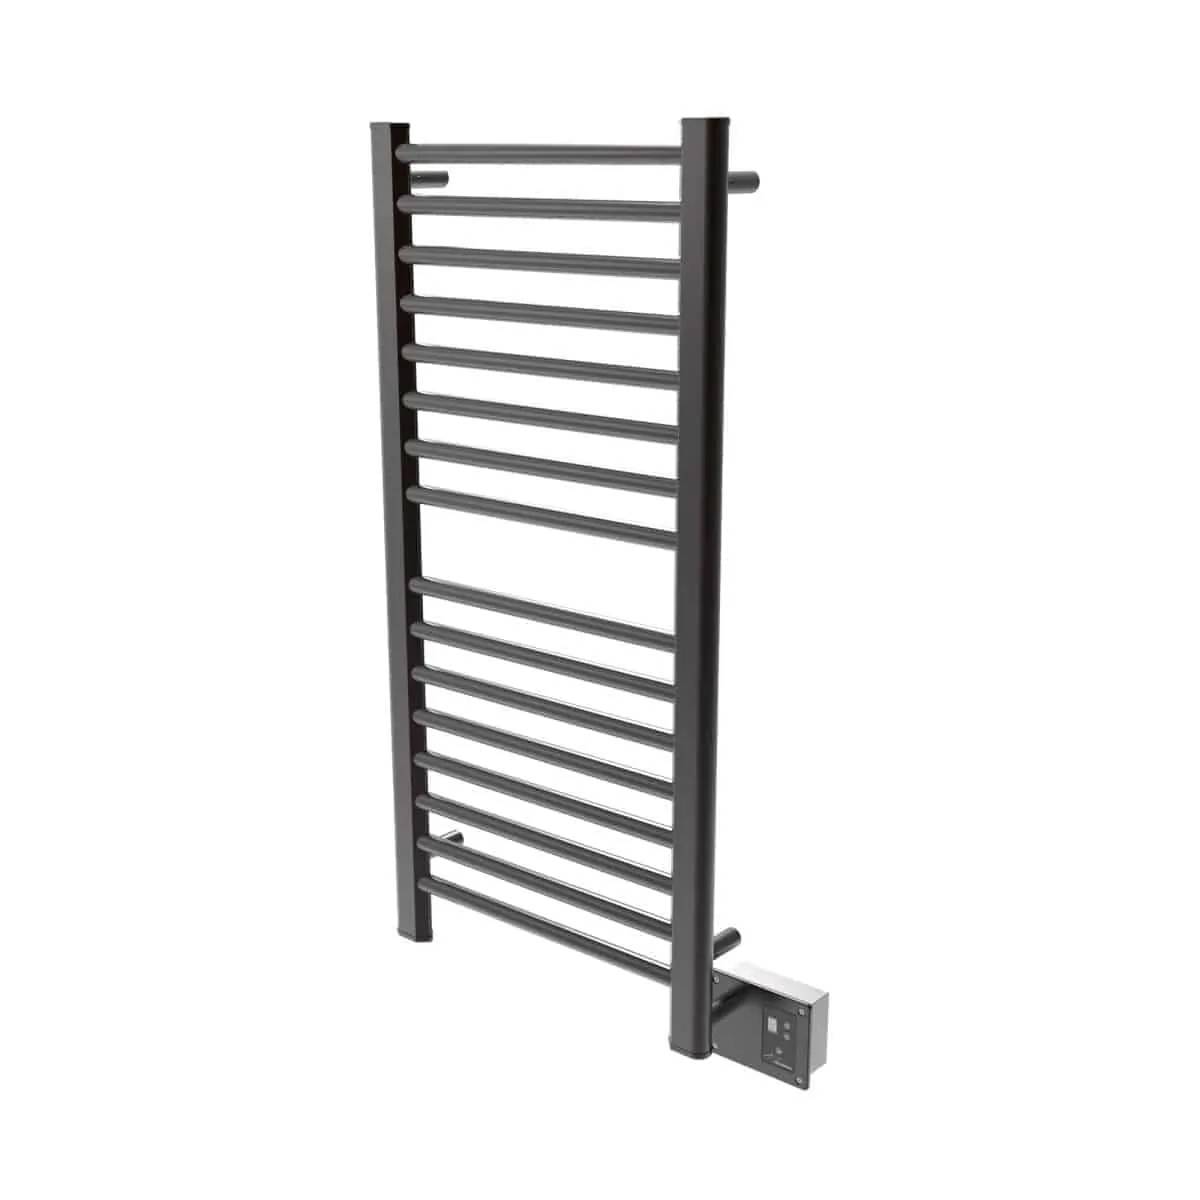 Amba S2142O Model 16 Bar Hardwired Towel Warmer - Oil Rubbed Bronze - Click Image to Close